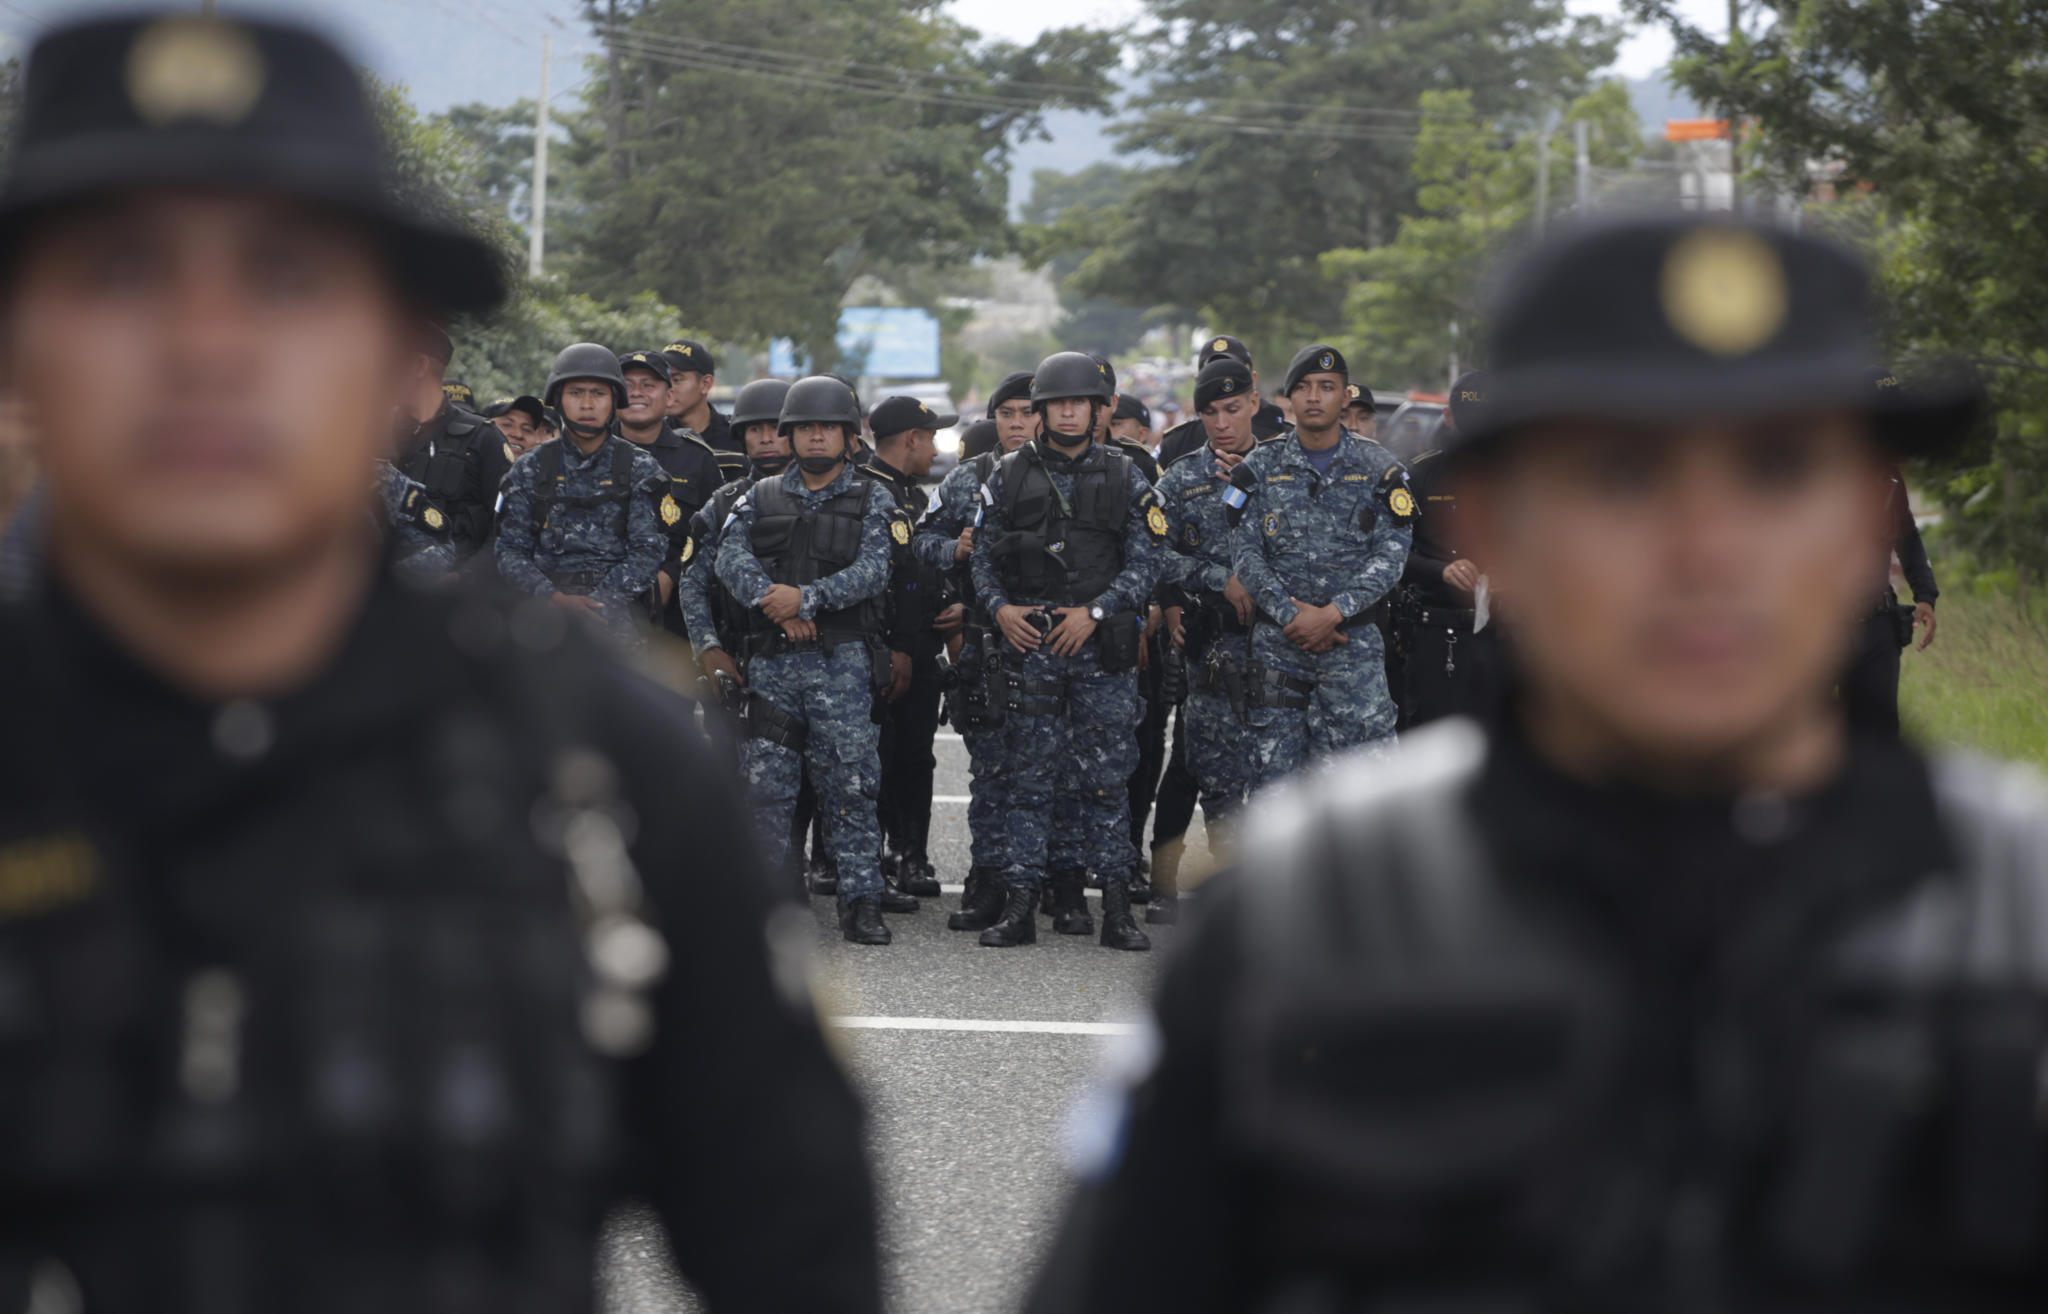 Guatemalan police stand in the road to block Honduran migrants making their way to the U.S., in Esquipulas, Guatemala, Monday, Oct. 15, 2018. The caravan began as about 160 people who first gathered early Friday to depart from San Pedro Sula, Honduras, figuring that traveling as a group would make them less vulnerable to robbery, assault and other dangers common on the migratory path through Central America and Mexico. The group has since grown to at least 1,600 people. (AP Photo/Moises Castillo)